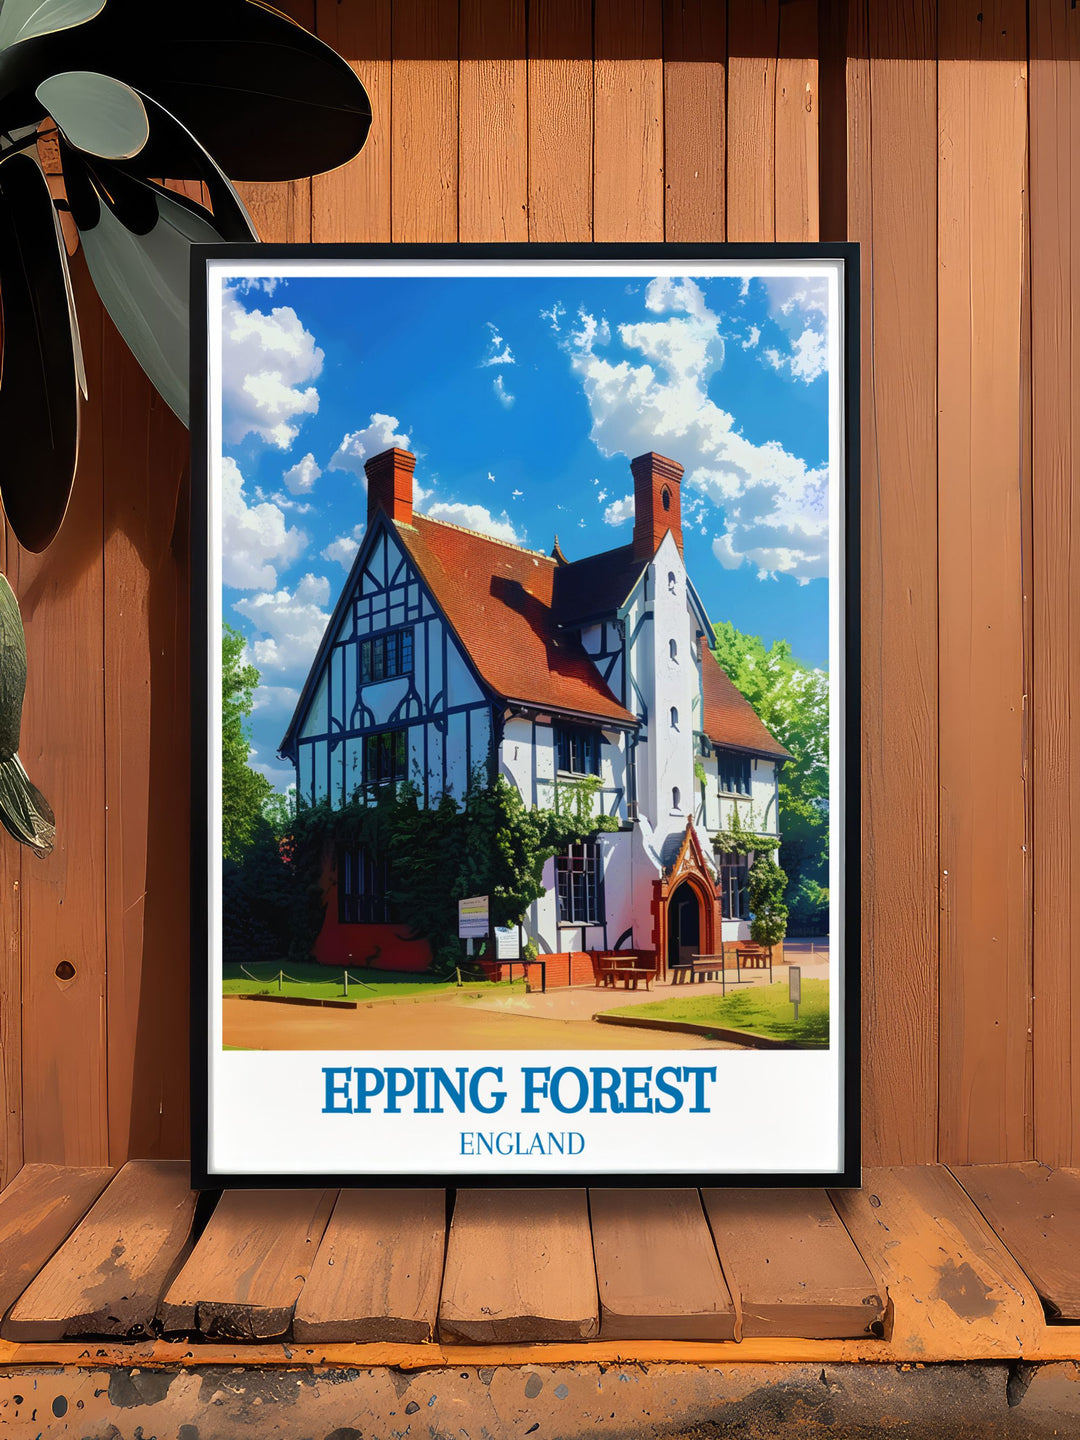 Framed art of Epping Forest, illustrating the lush greenery and historic significance of Londons ancient woodland.